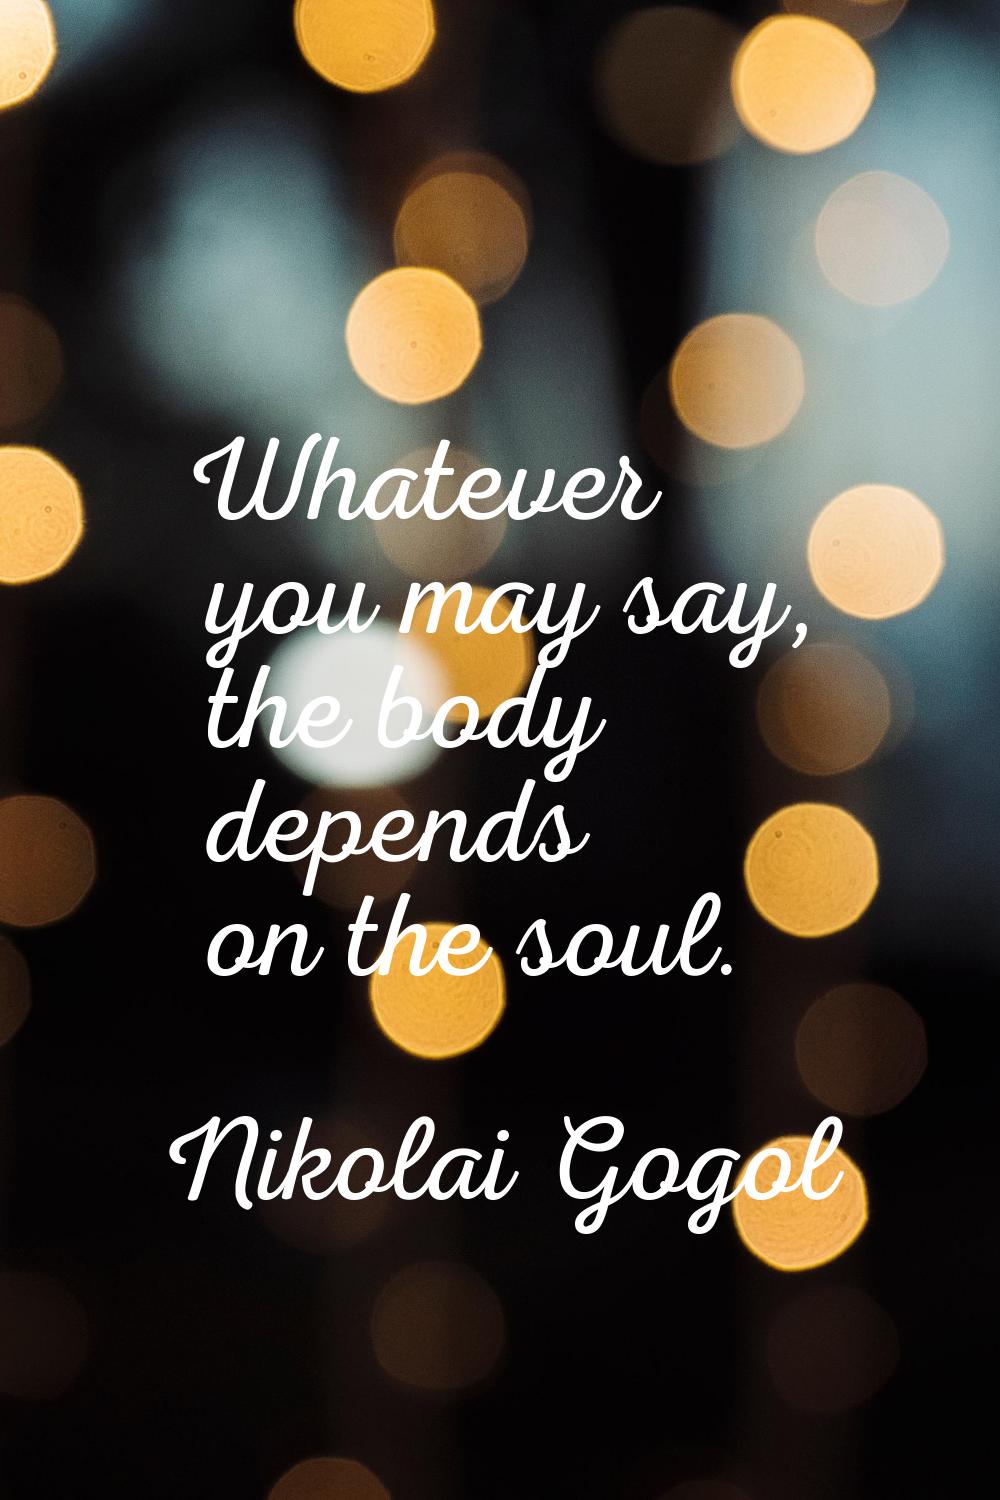 Whatever you may say, the body depends on the soul.